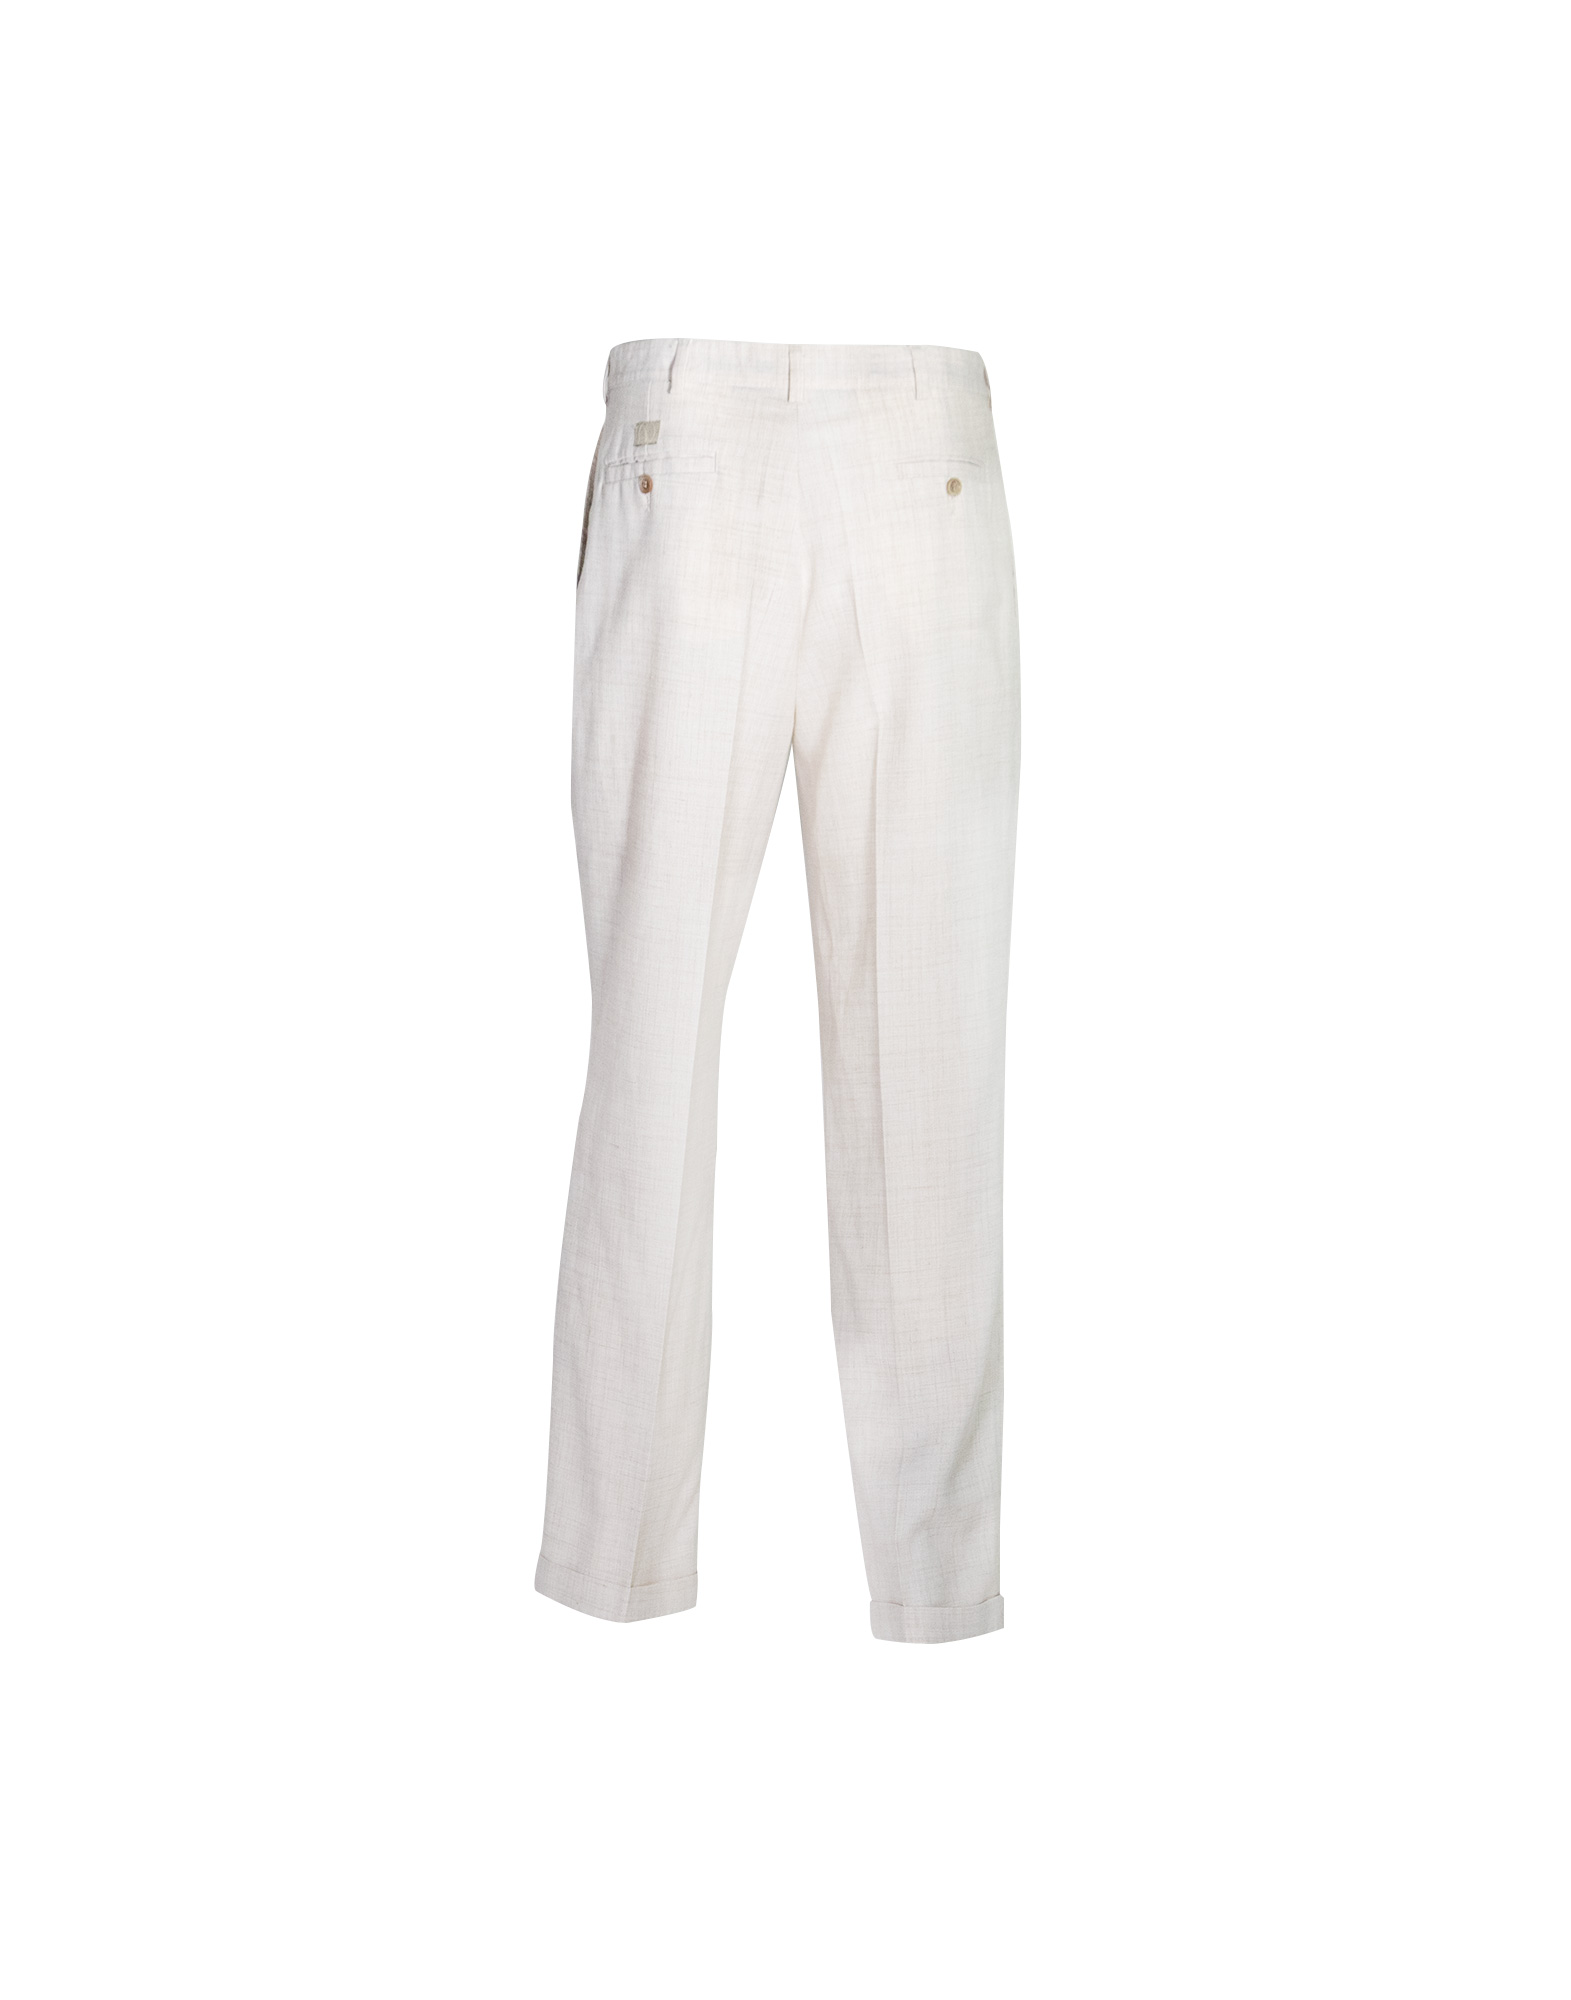 Yves Saint Laurent - Linen and polyester trousers